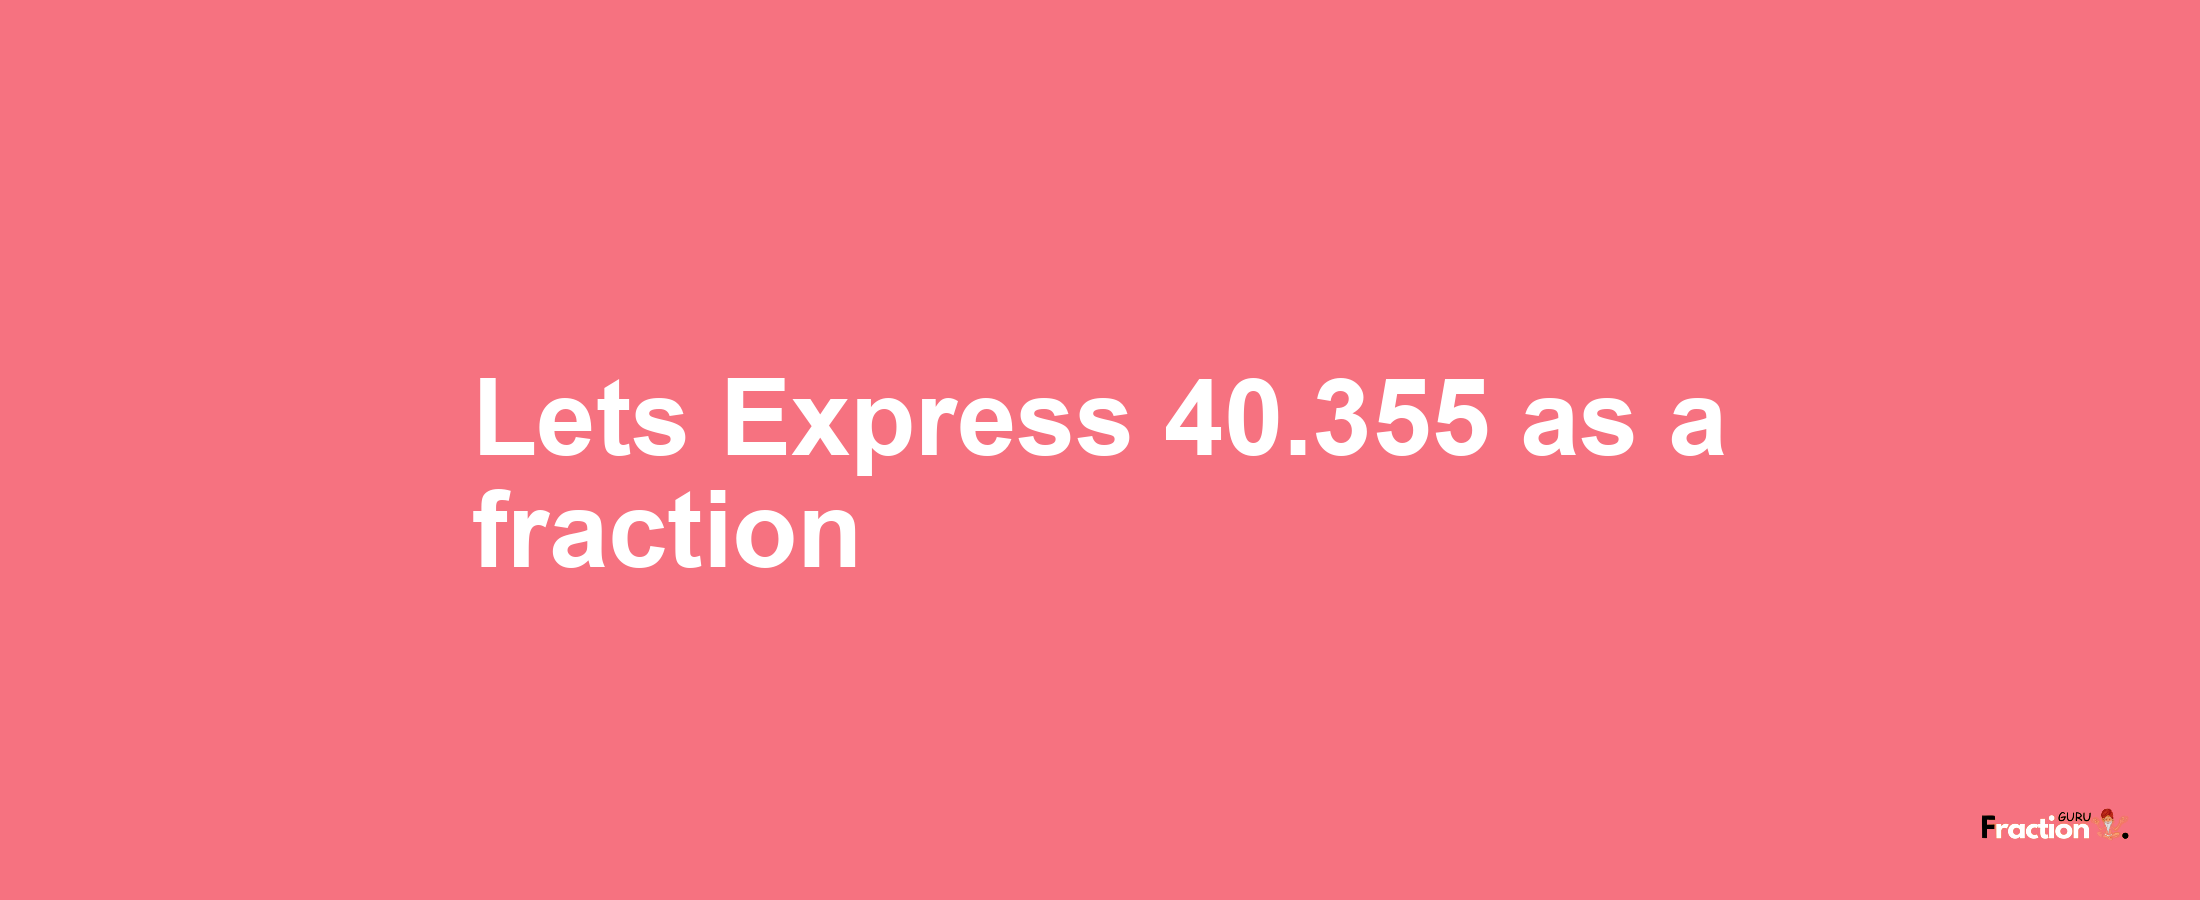 Lets Express 40.355 as afraction